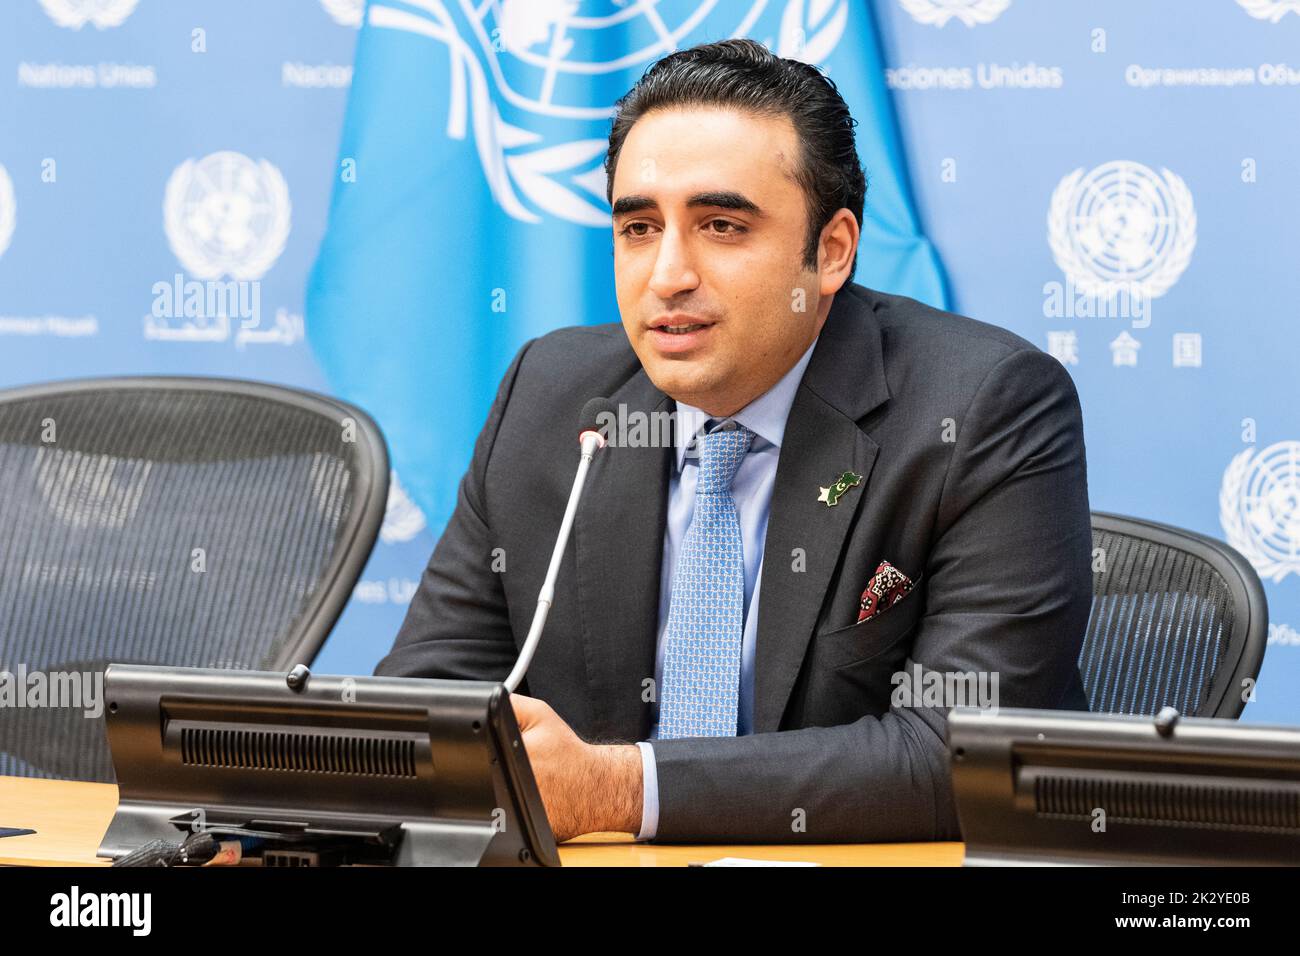 New York, NY - September 23, 2022: Press briefing by Bilawal Bhutto Zardari, Minister for Foreign Affairs of the Islamic Republic of Pakistan at UN Headquarters Stock Photo